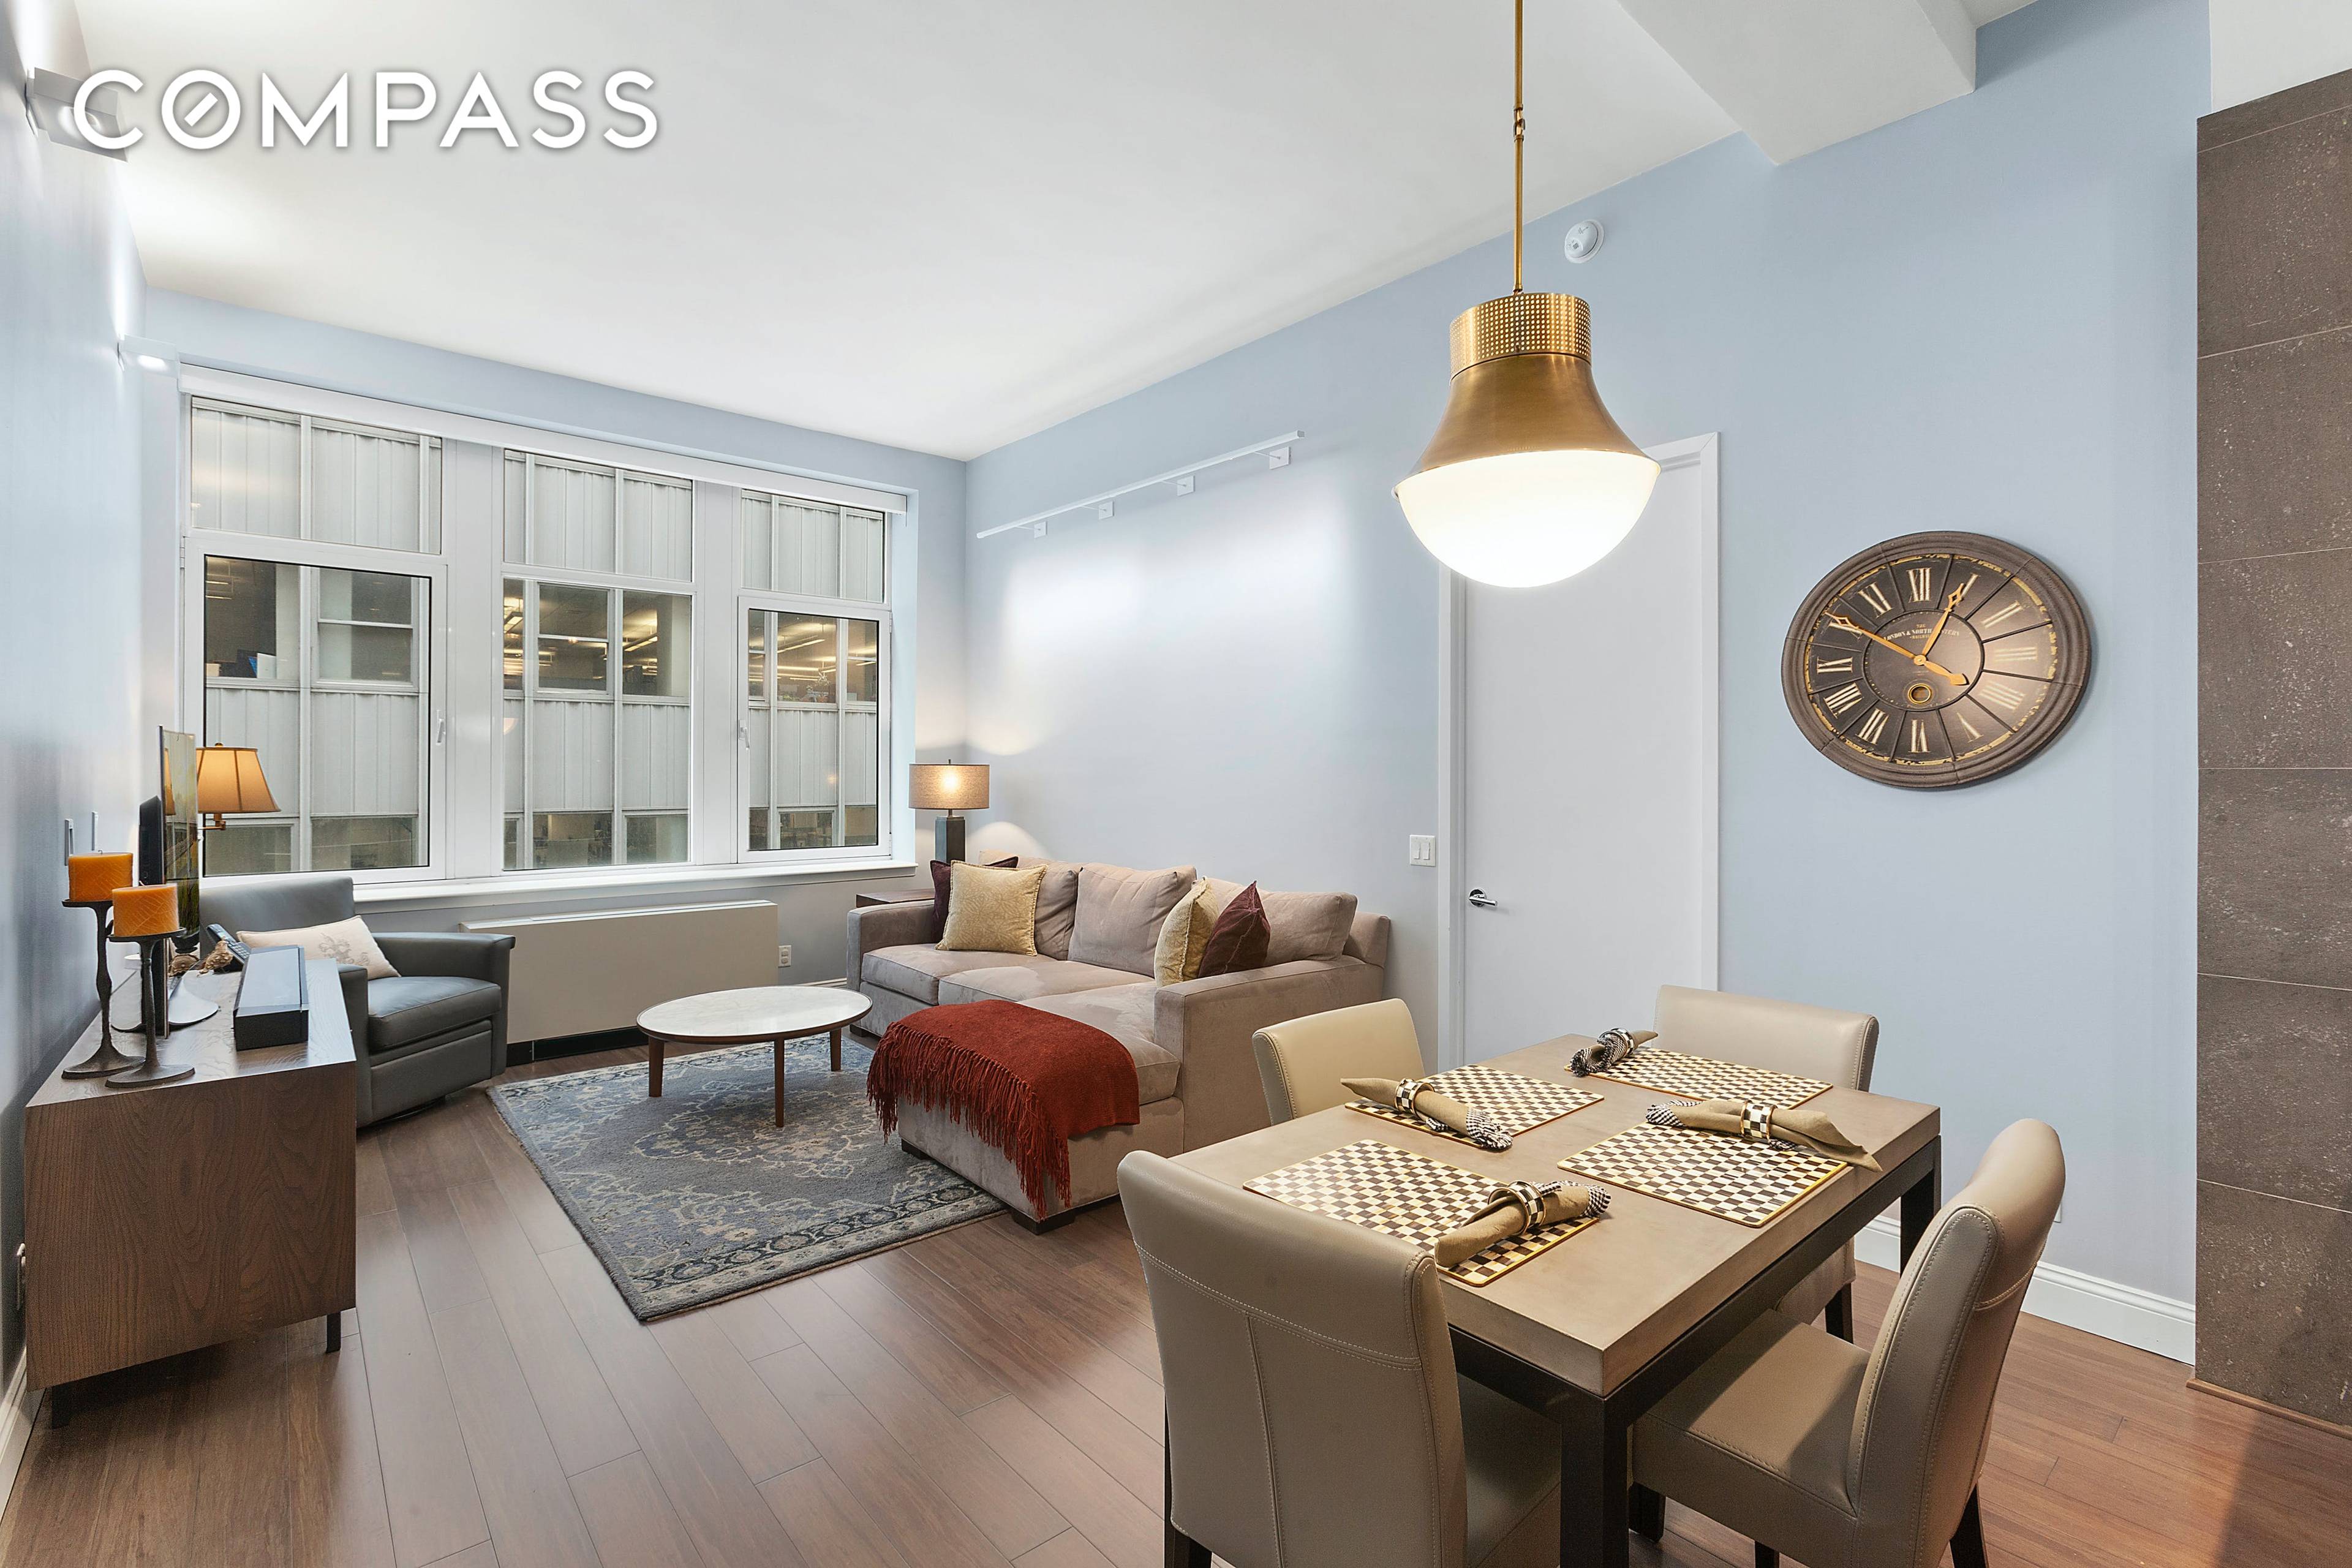 Rarely available ! Residence 3D at 59 John Street offers a very large and well laid out 1, 210 square feet Split Two bedroom and Two Full Baths with a ...